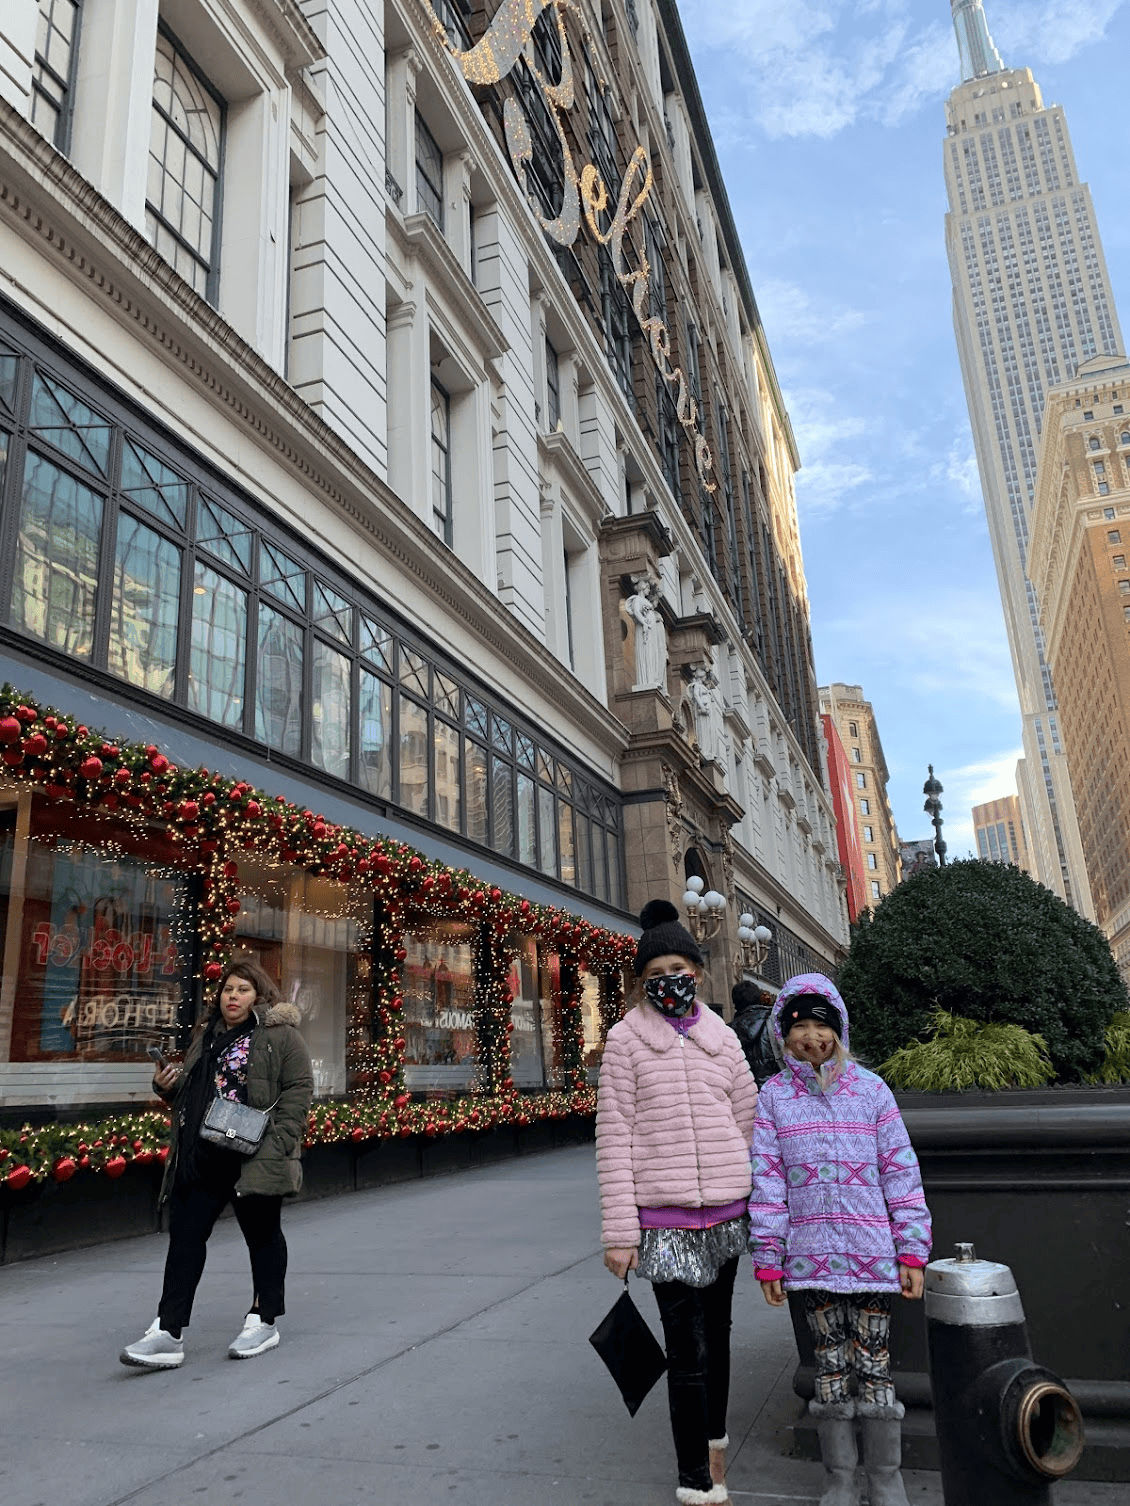 Macy's Herald Square at Christmas